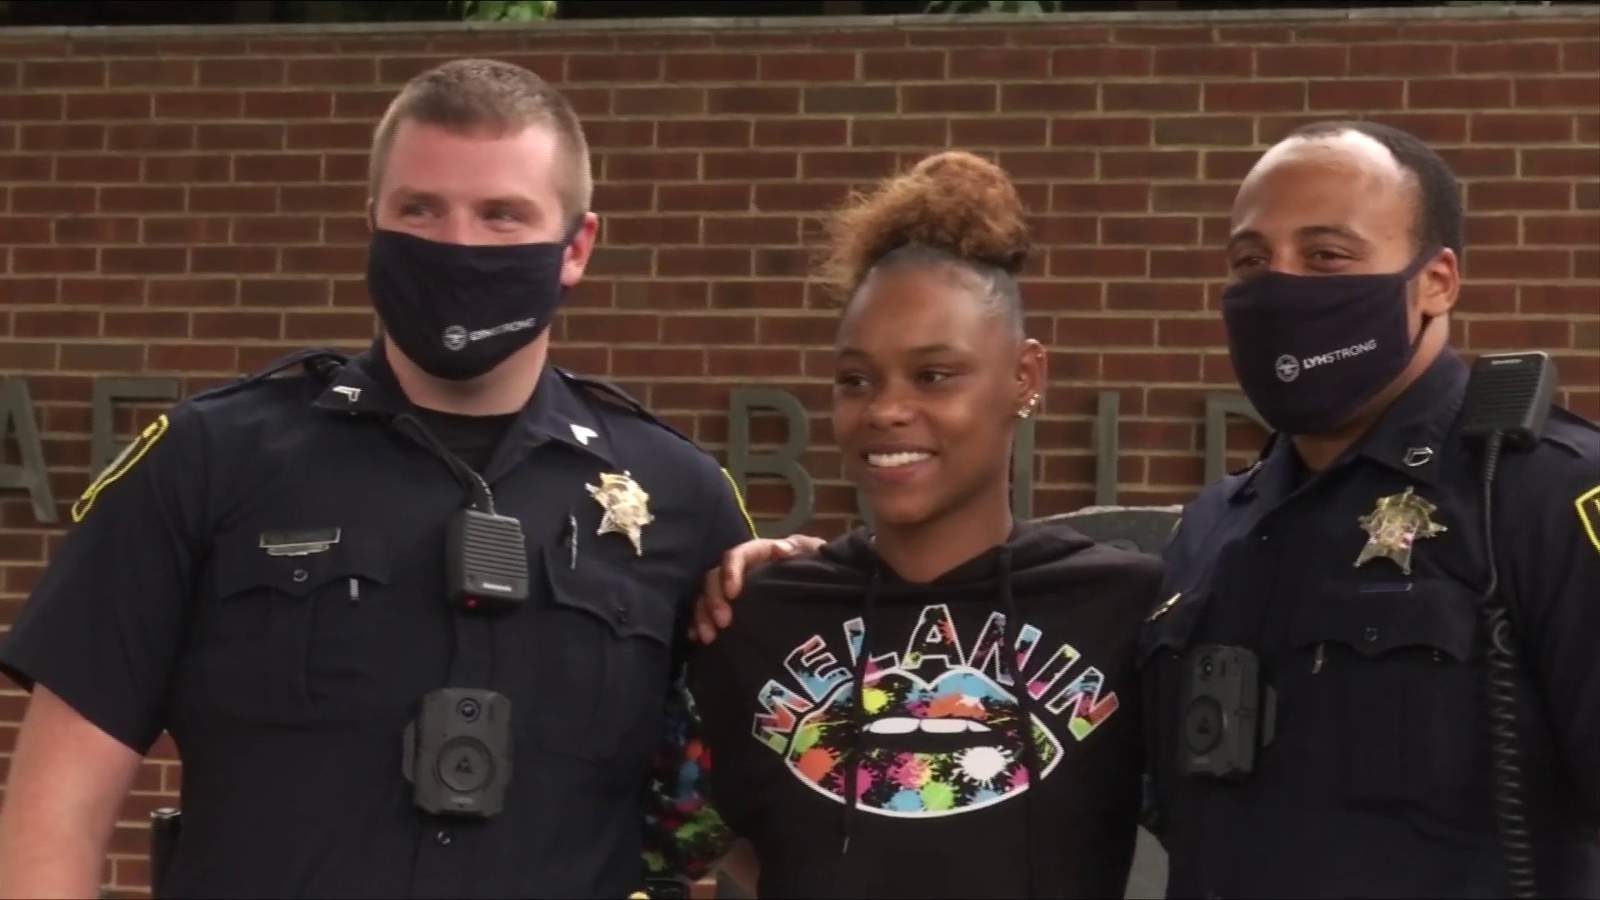 ’God puts people in the right places': Lynchburg police officers save woman’s life after choking